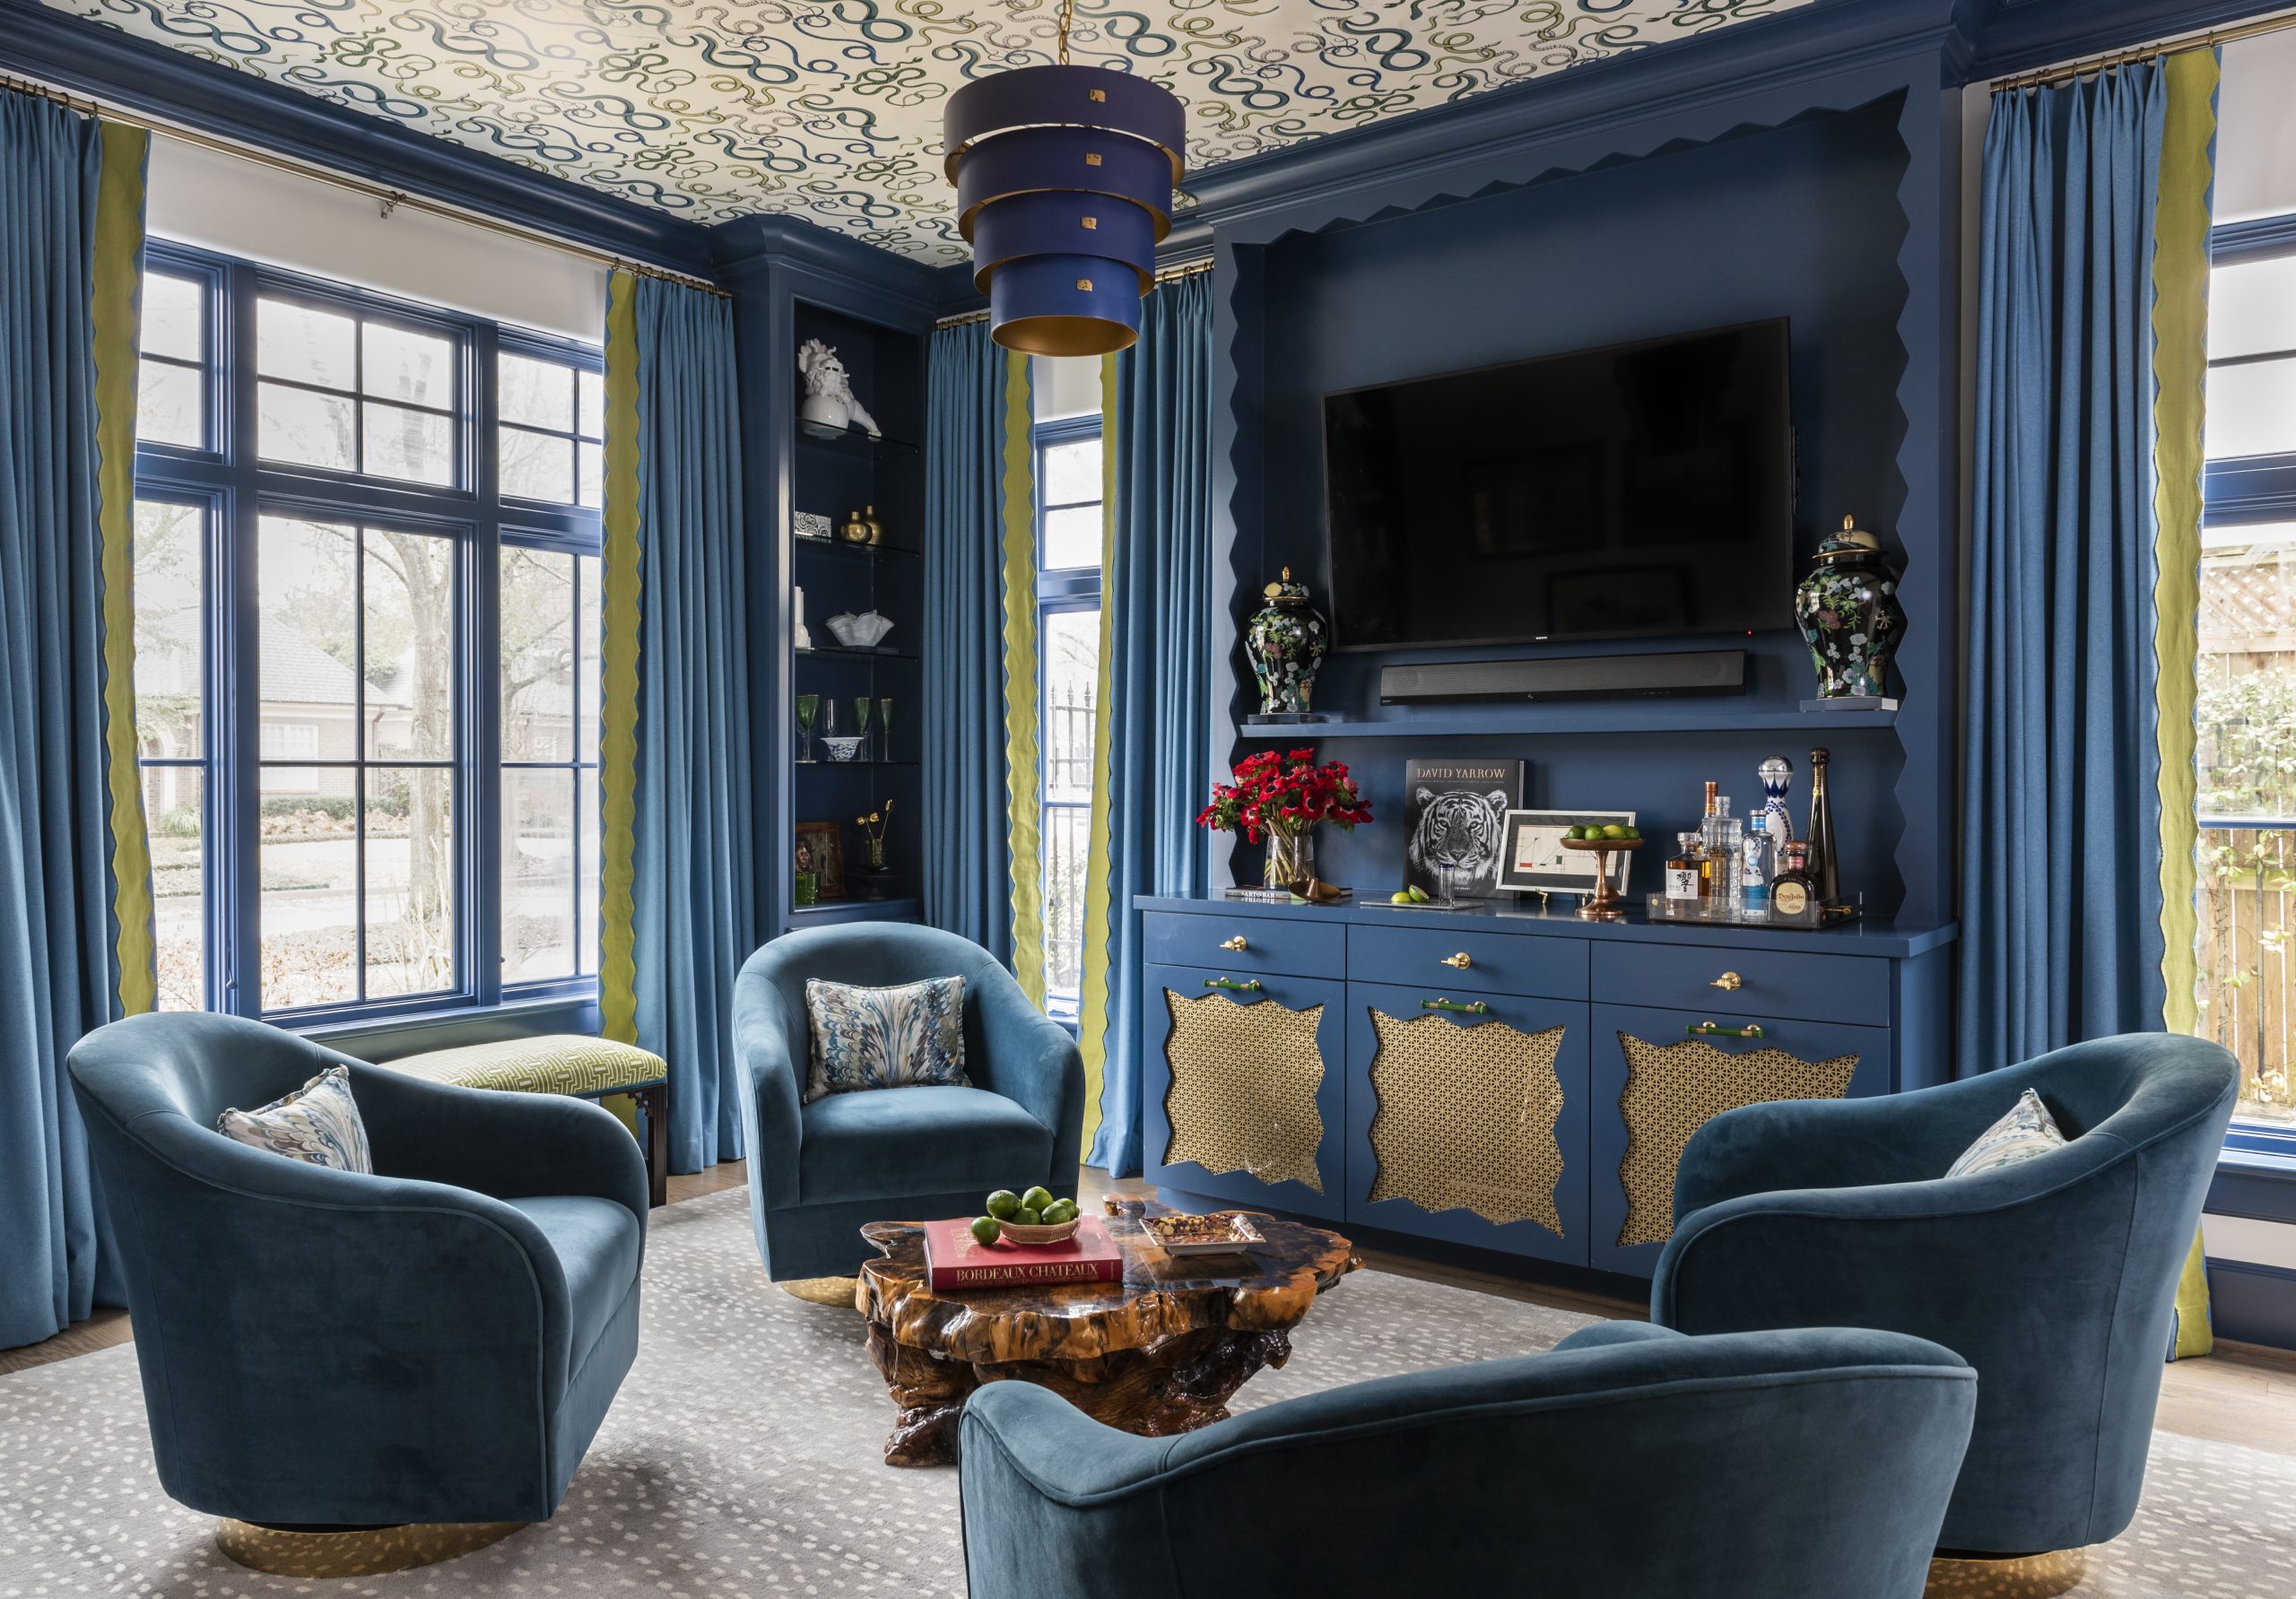 Lounge Room with snake print wallpaper on ceiling, deep blue trim, cabinetry, drapery and chairs, with scalloped details throughout by Creative Tonic